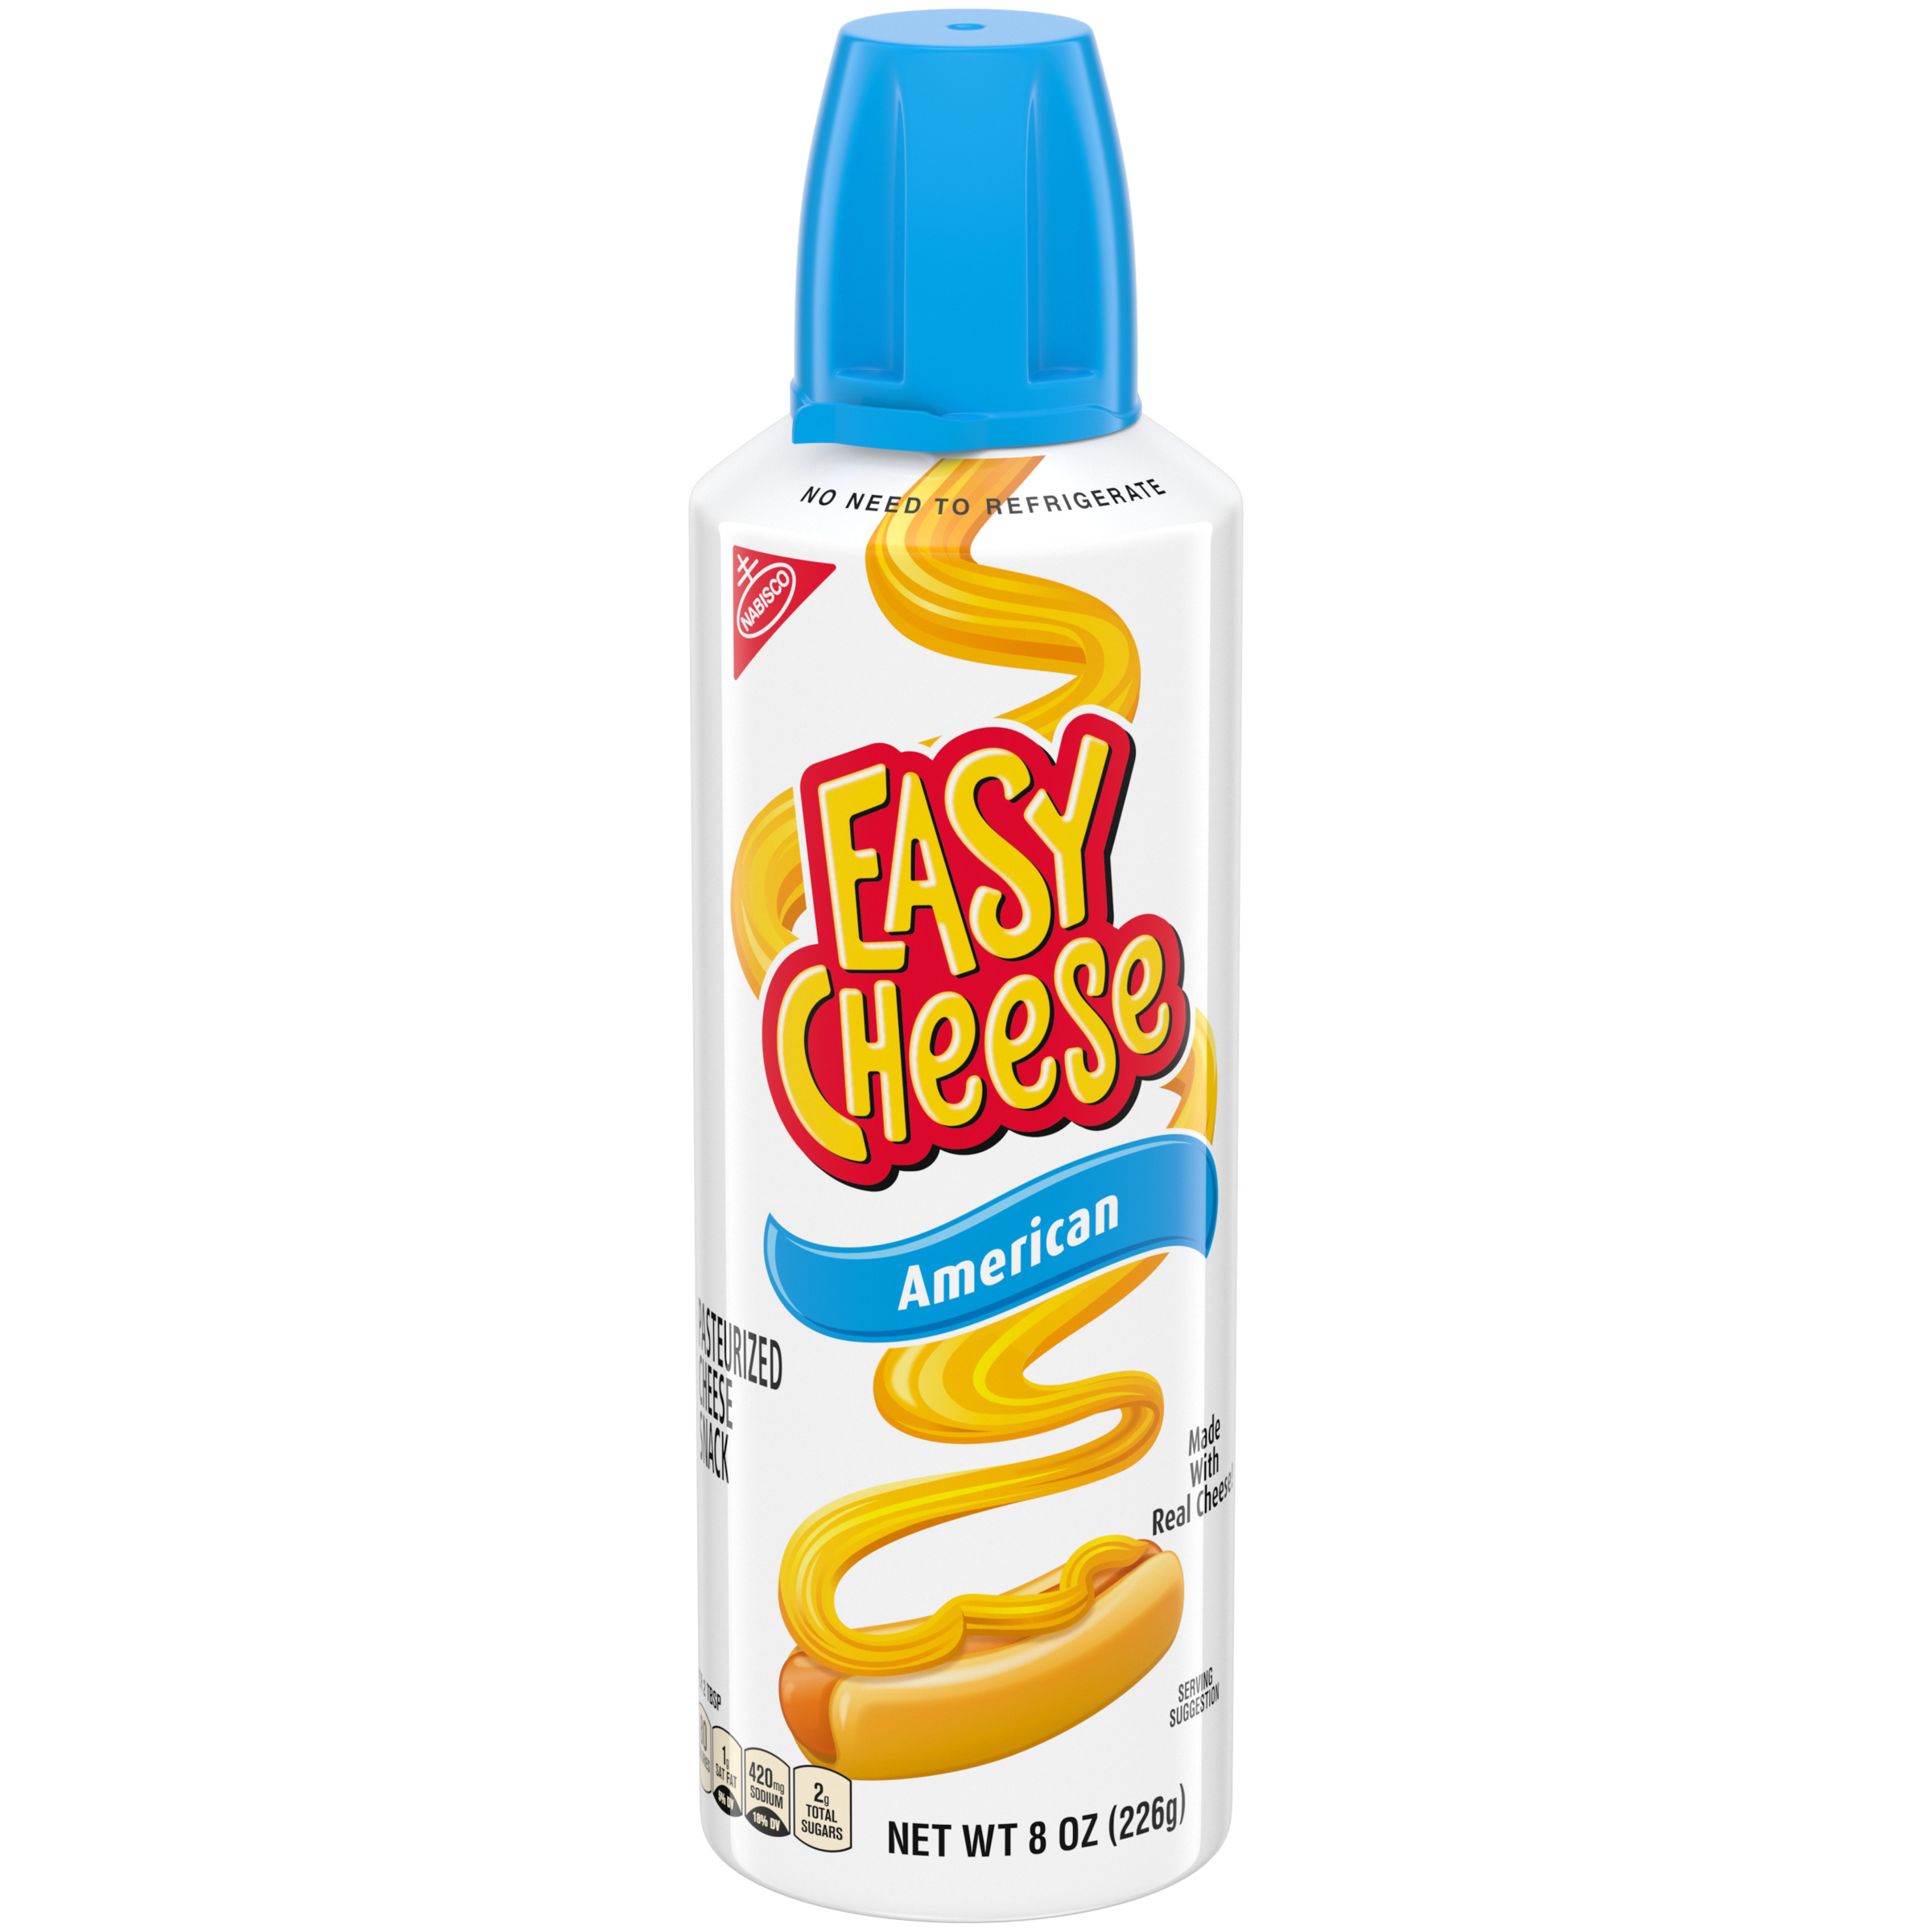 EASY CHEESE American Pasteurized Cheese Snack 8 oz